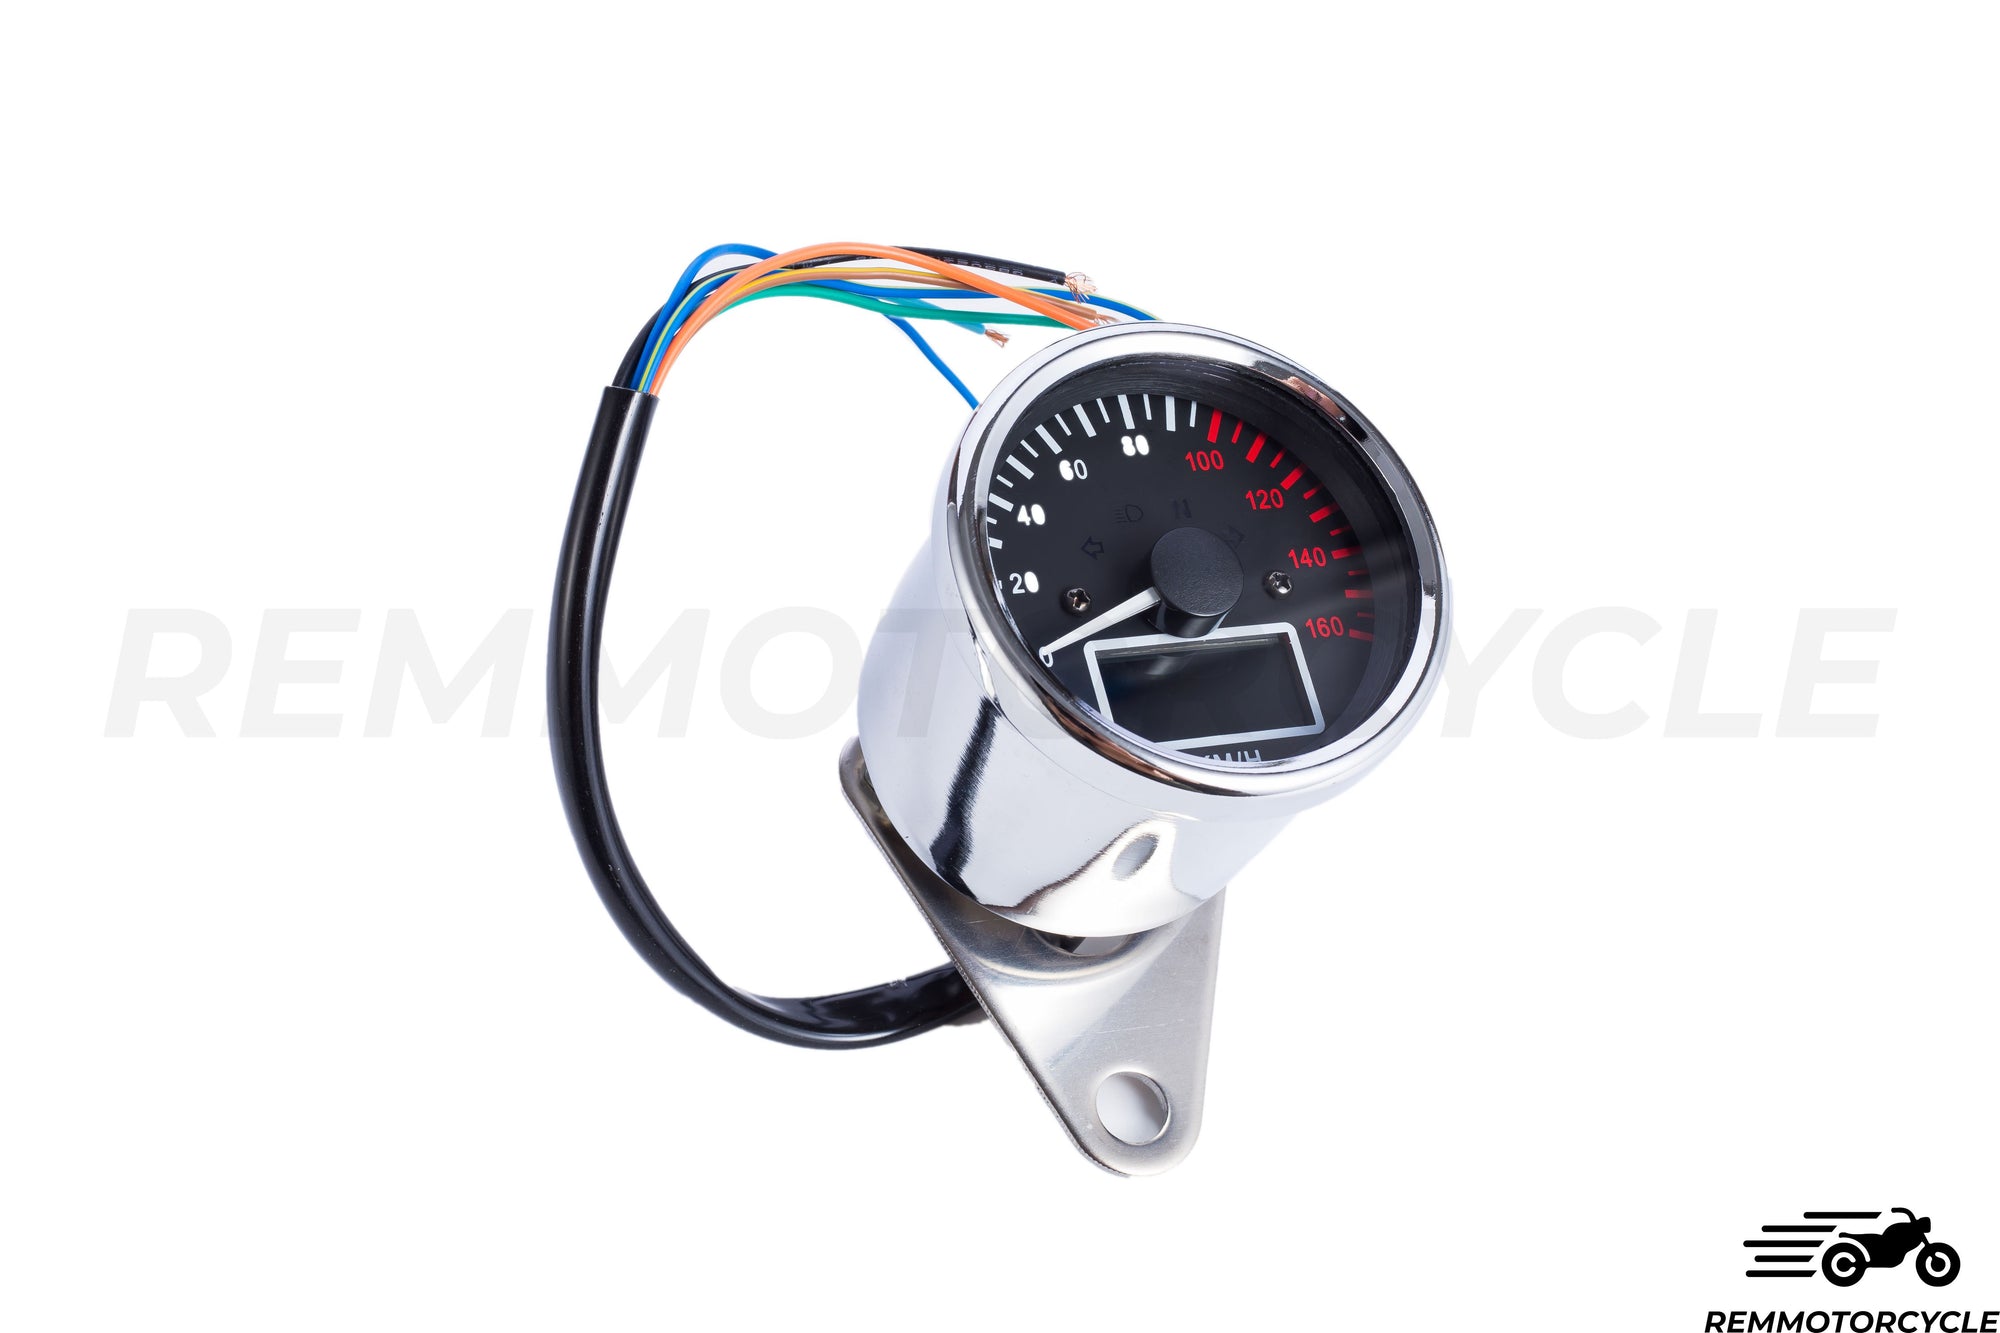 Universal motorcycle counter KM/H CLASSIC Digital Chrome or Black